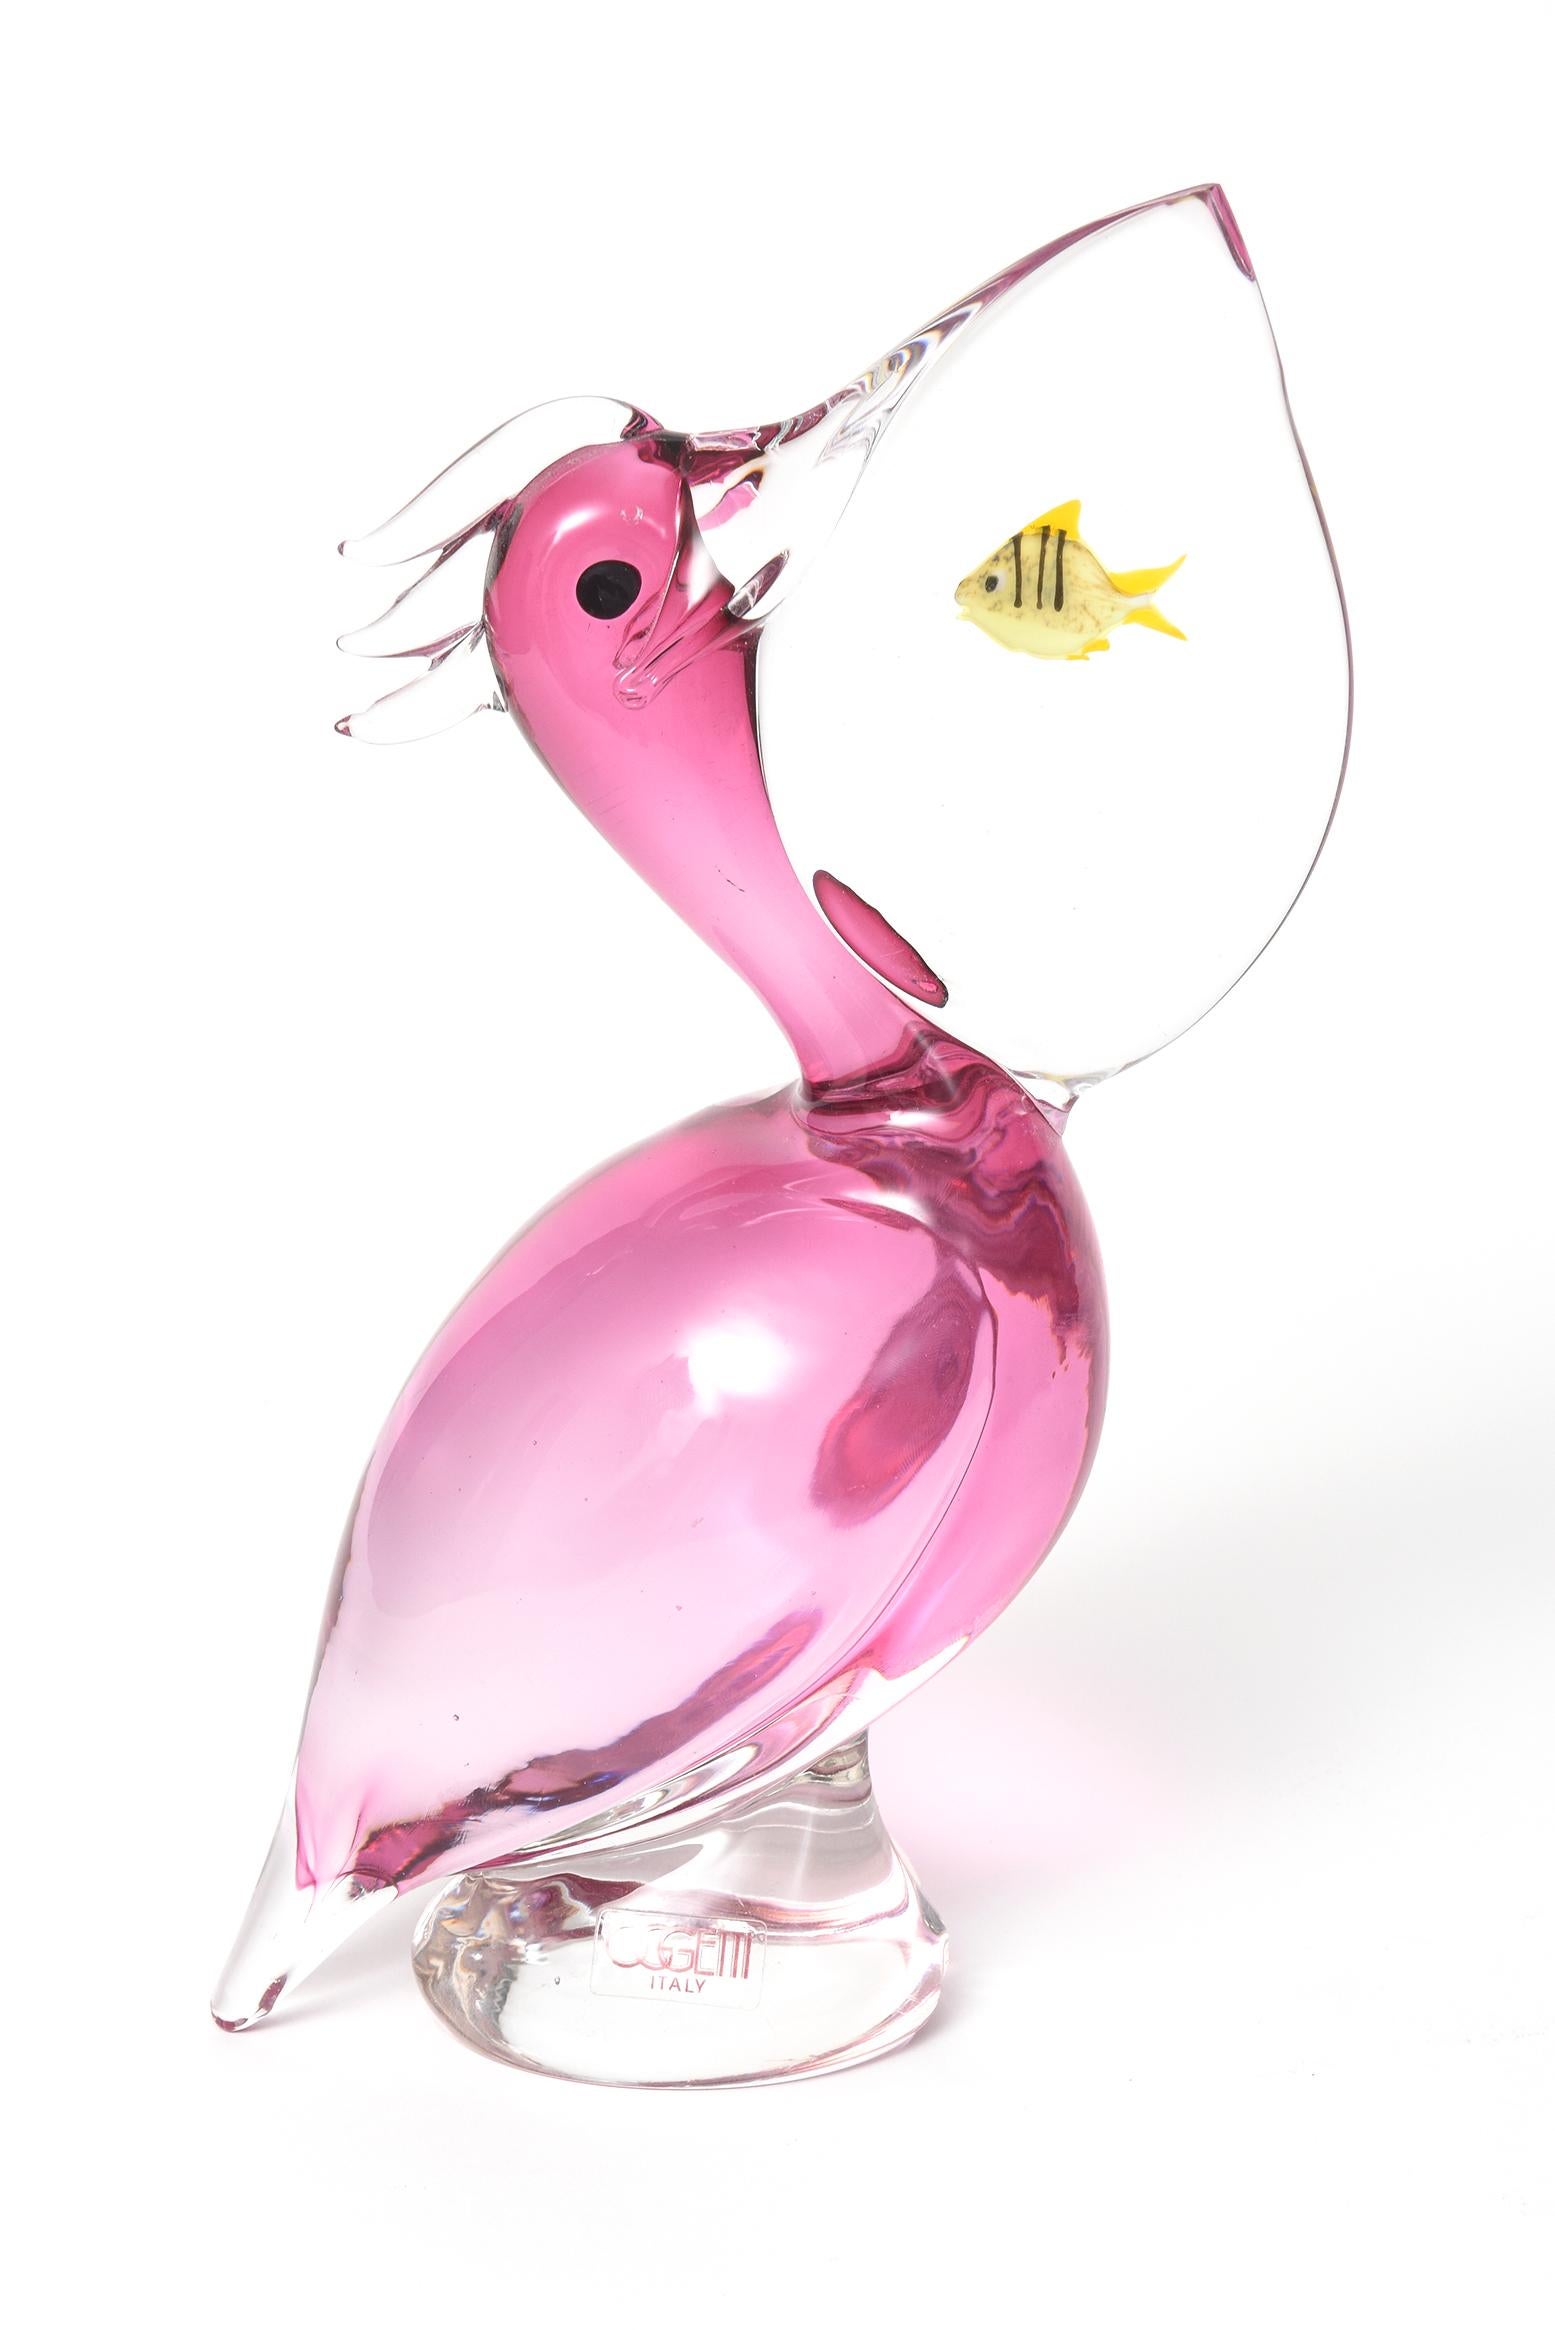 Oggetti Italian Murano glass pelican features a pink hued body and transparent bill with a small yellow fish inside of it. Marked with a sticker Oggetti Italy. Signed on bottom by Elio Raffaeli

Oggetti was founded in 1975 and initially their